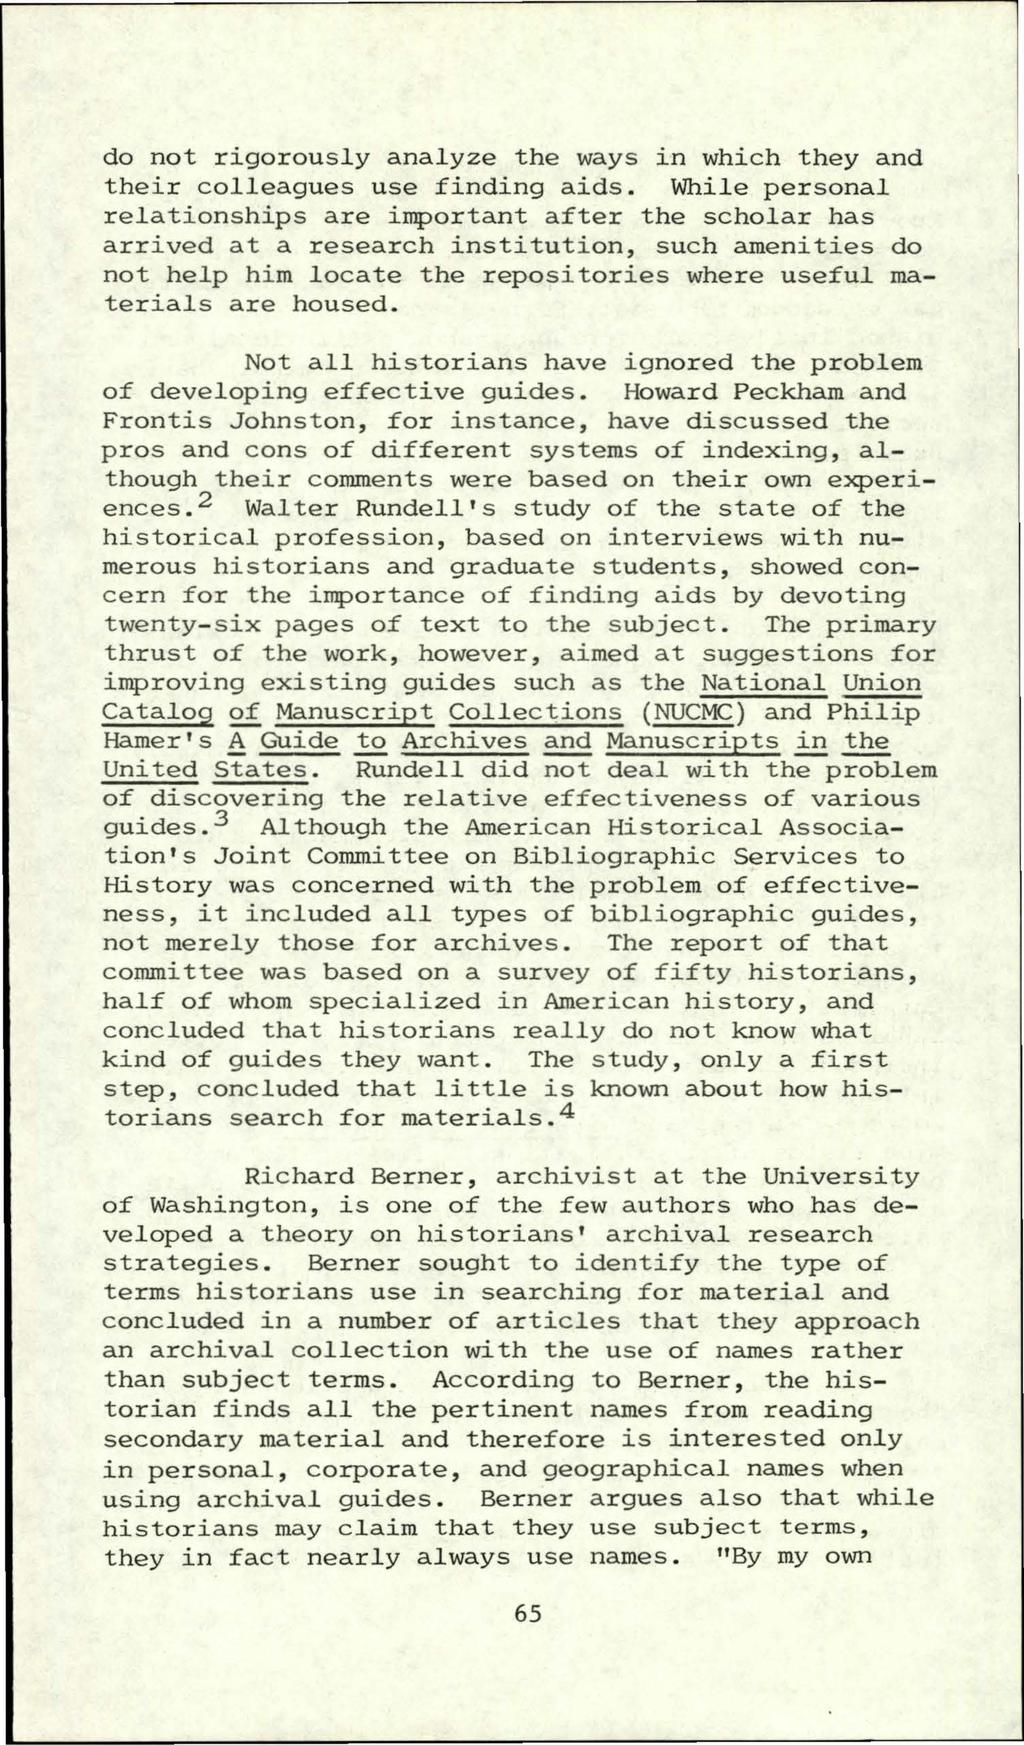 Georgia Archive, Vol. 5 [1977], No. 1, Art. 7 do not rigorously analyze the ways in which they and their colleagues use finding aids.